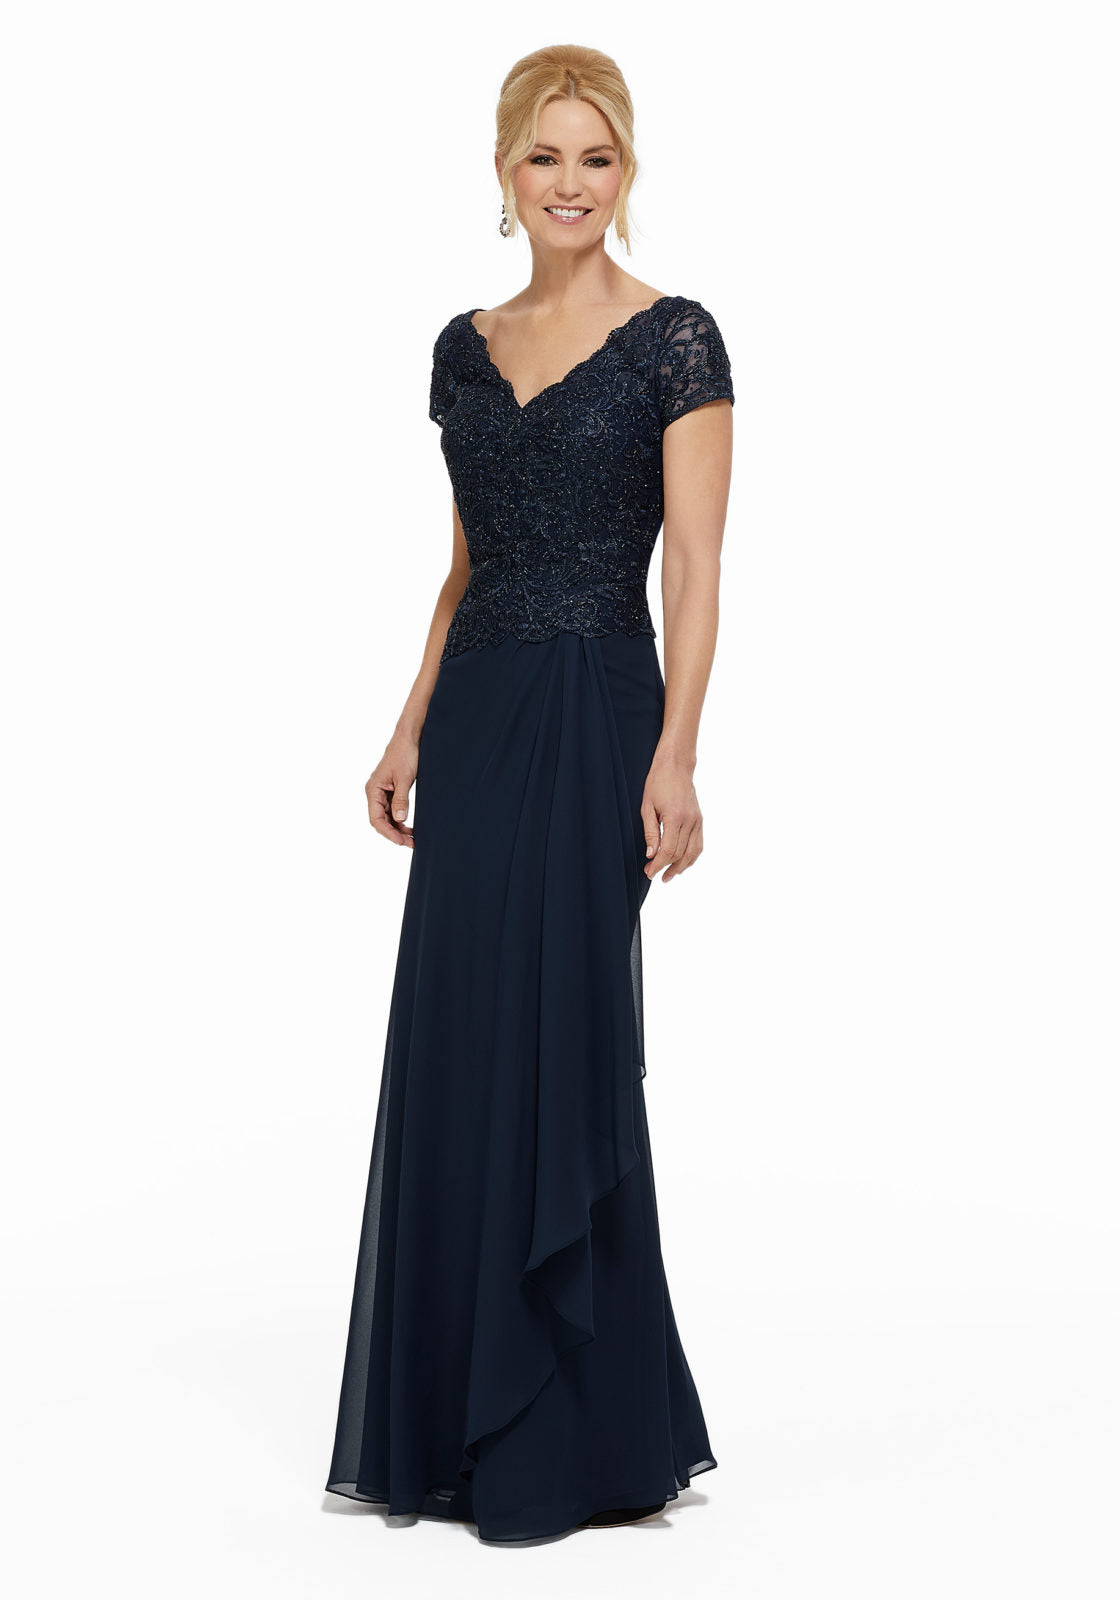 Chiffon evening gown featuring beaded lace appliques on a net bodice with short sleeves. Sheath silhouette with cascading detail on skirt.  Sizes: 2-24  Available in Wine, Navy  If we do not have your desired size or color in stock please call or email us for availability!